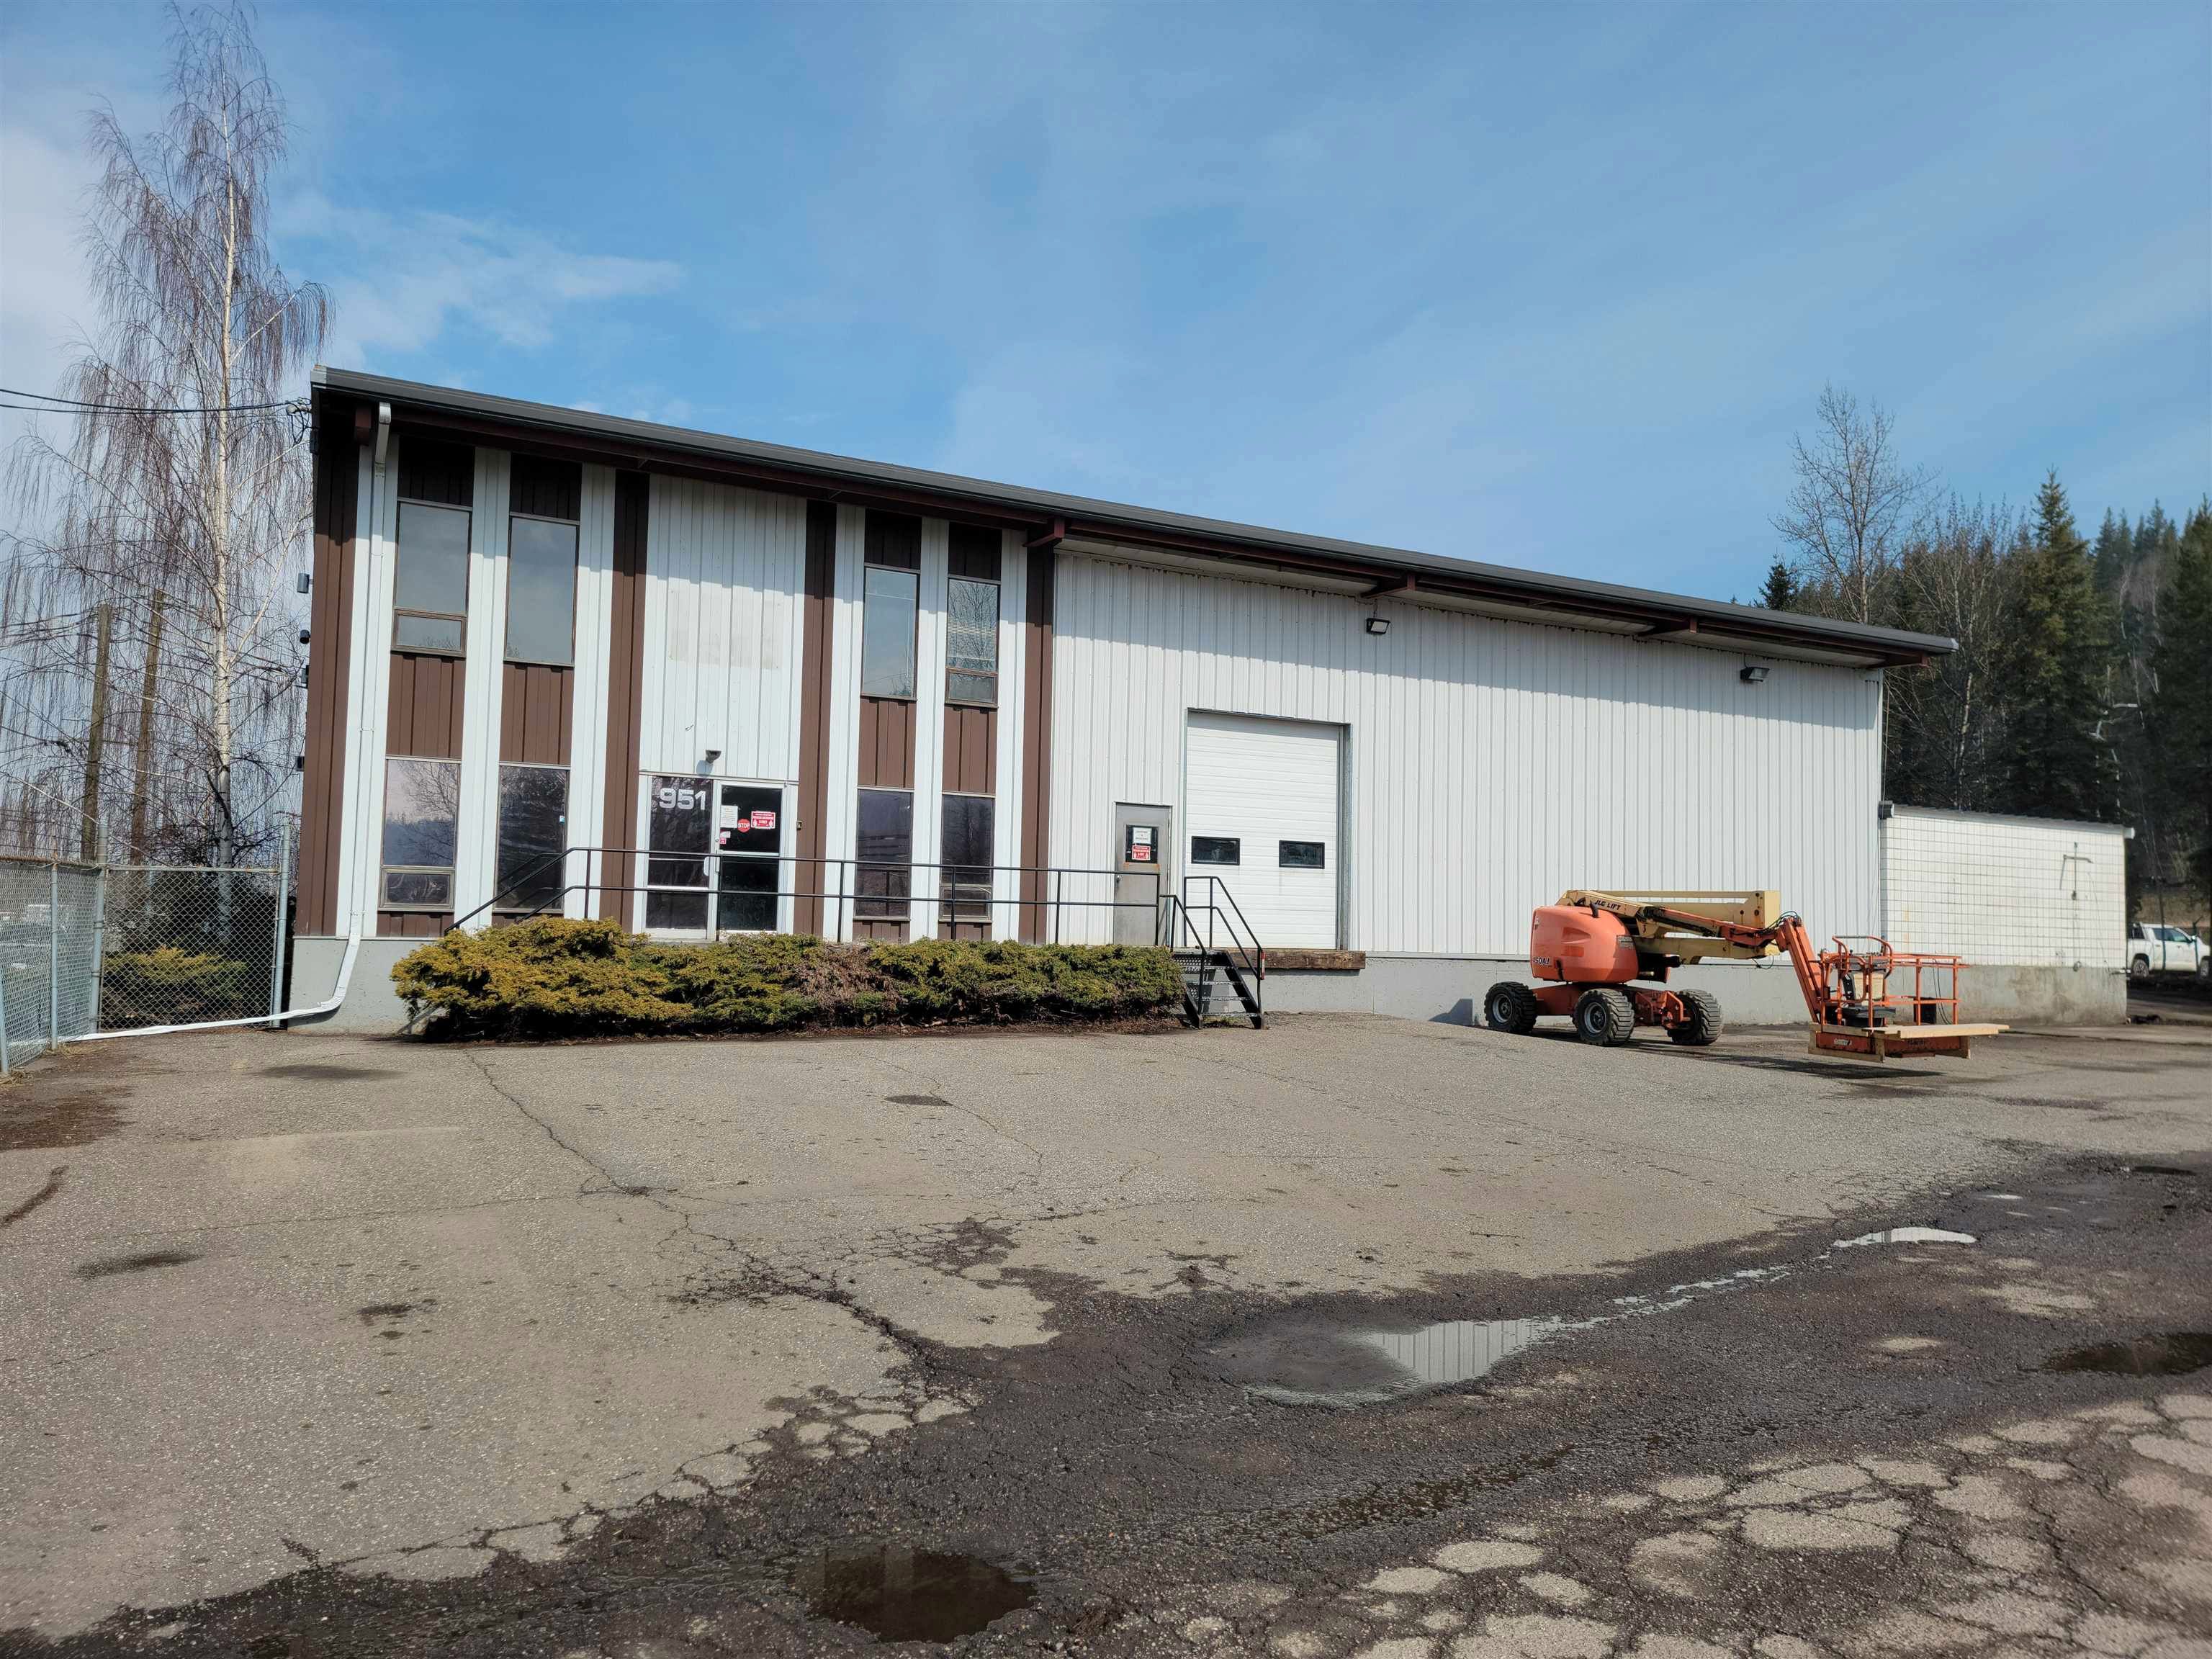 Main Photo: 951 GREAT Street in Prince George: BCR Industrial Industrial for lease (PG City South East (Zone 75))  : MLS®# C8043904